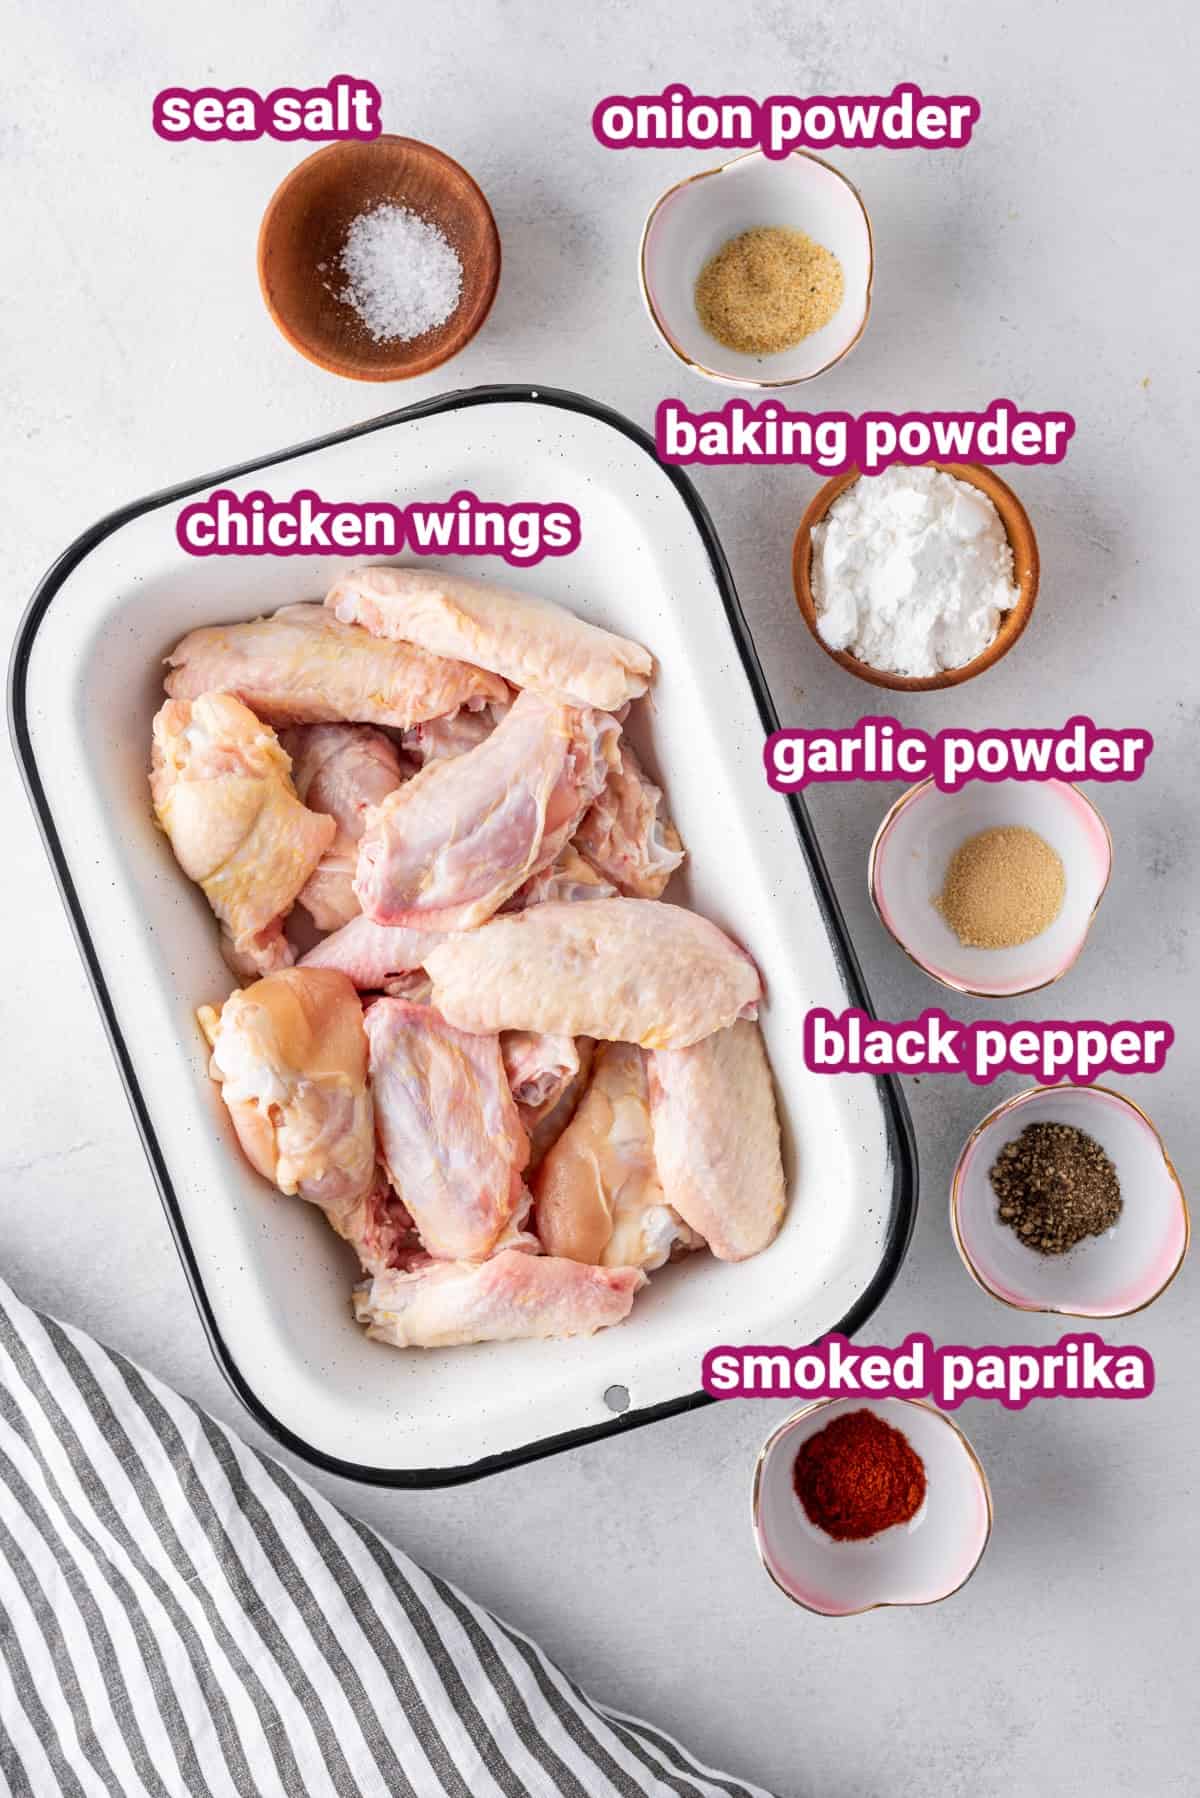 Overhead view of the labeled ingredients needed for baked chicken wings: a tray of raw wings, a wooden bowl of salt, and bowls of onion powder, baking powder, garlic powder, black pepper, and smoked paprika